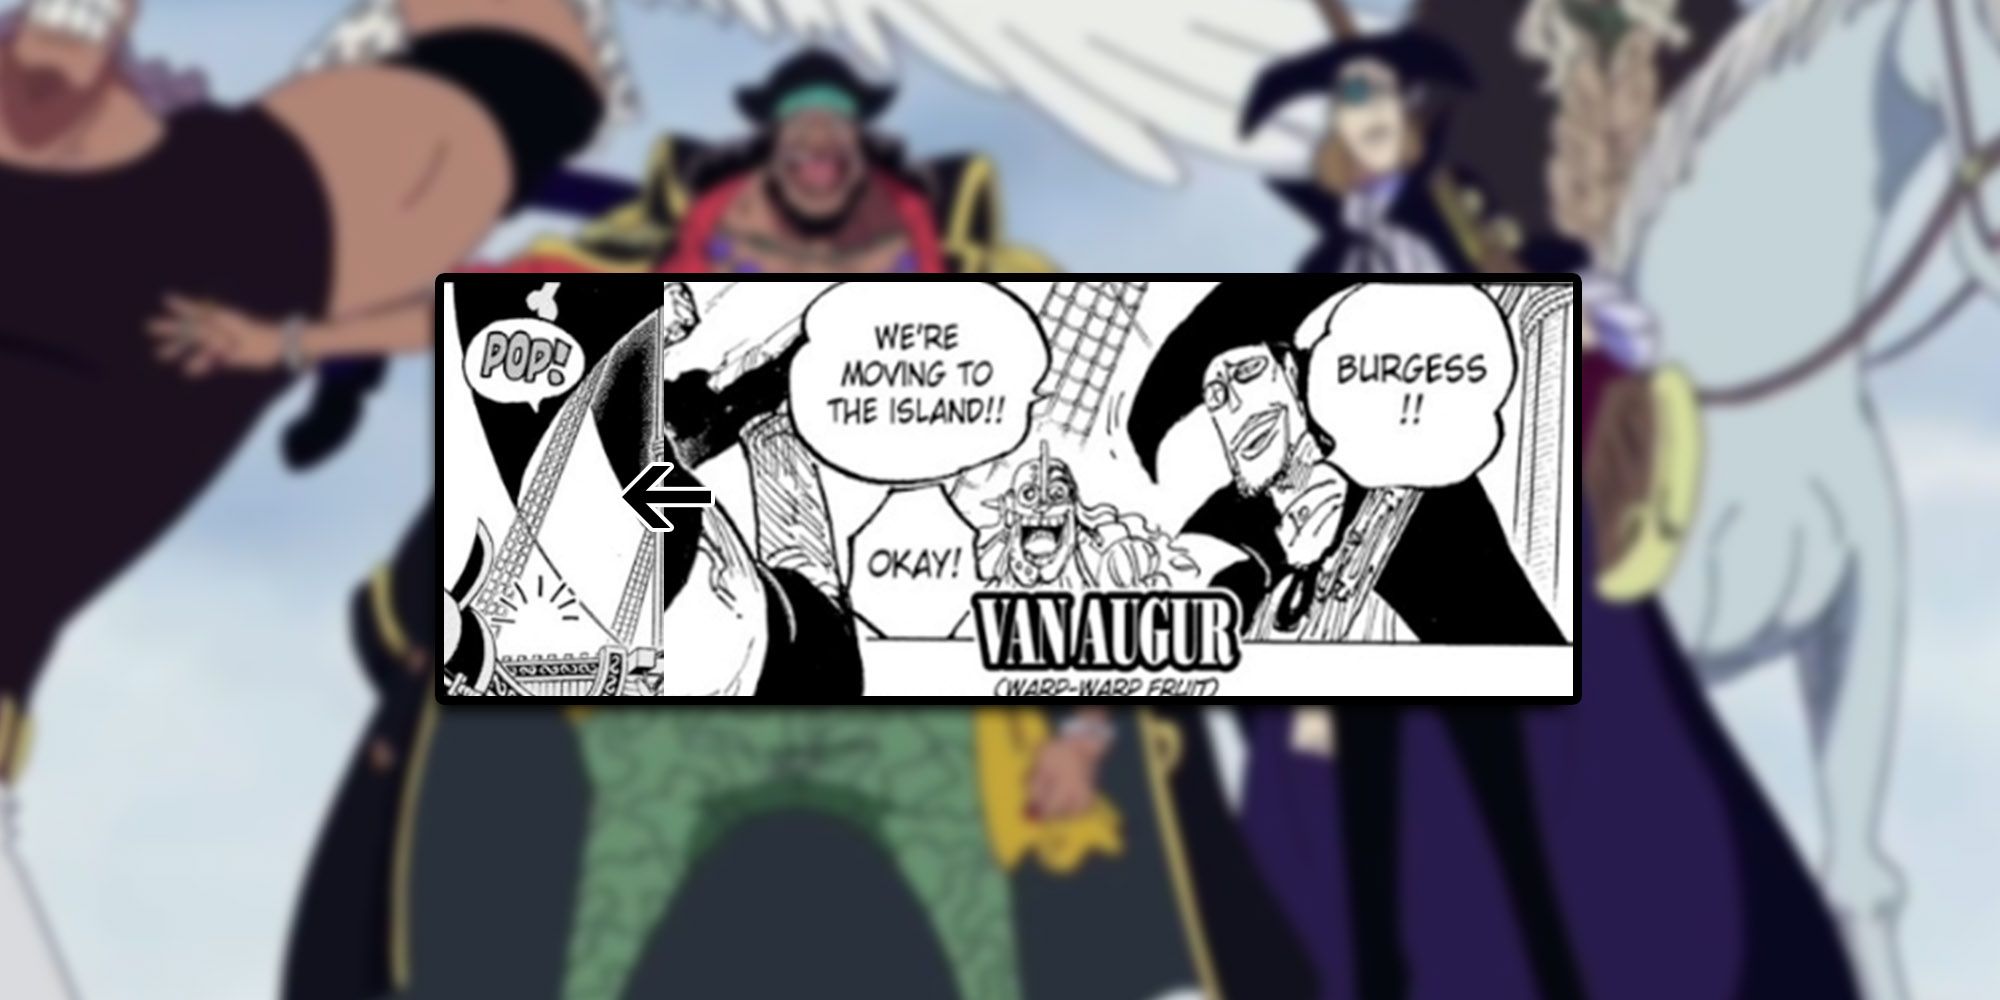 One Piece - Image Of Van Augur Standing With Blackbeard Pirates With Example Of Him Using Warp Fruit Overlaid On Top